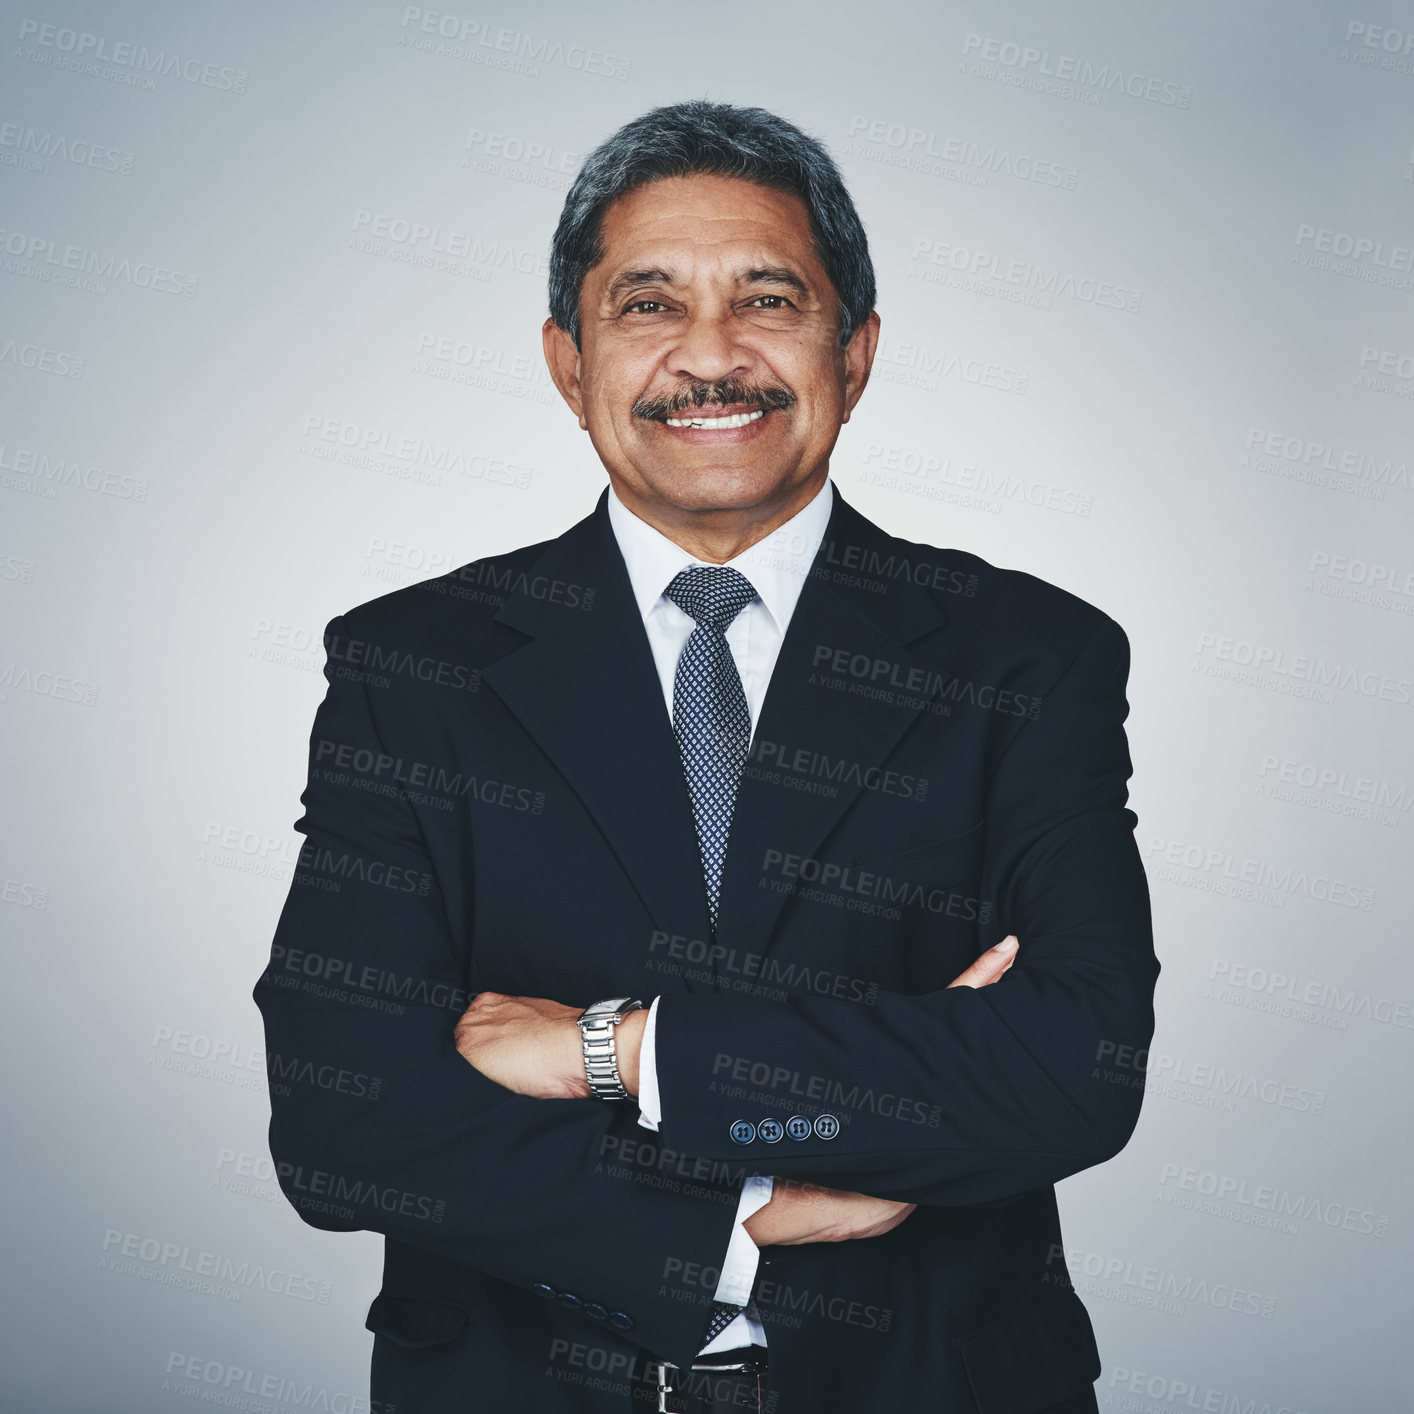 Buy stock photo Studio portrait of a mature businessman posing against a grey background